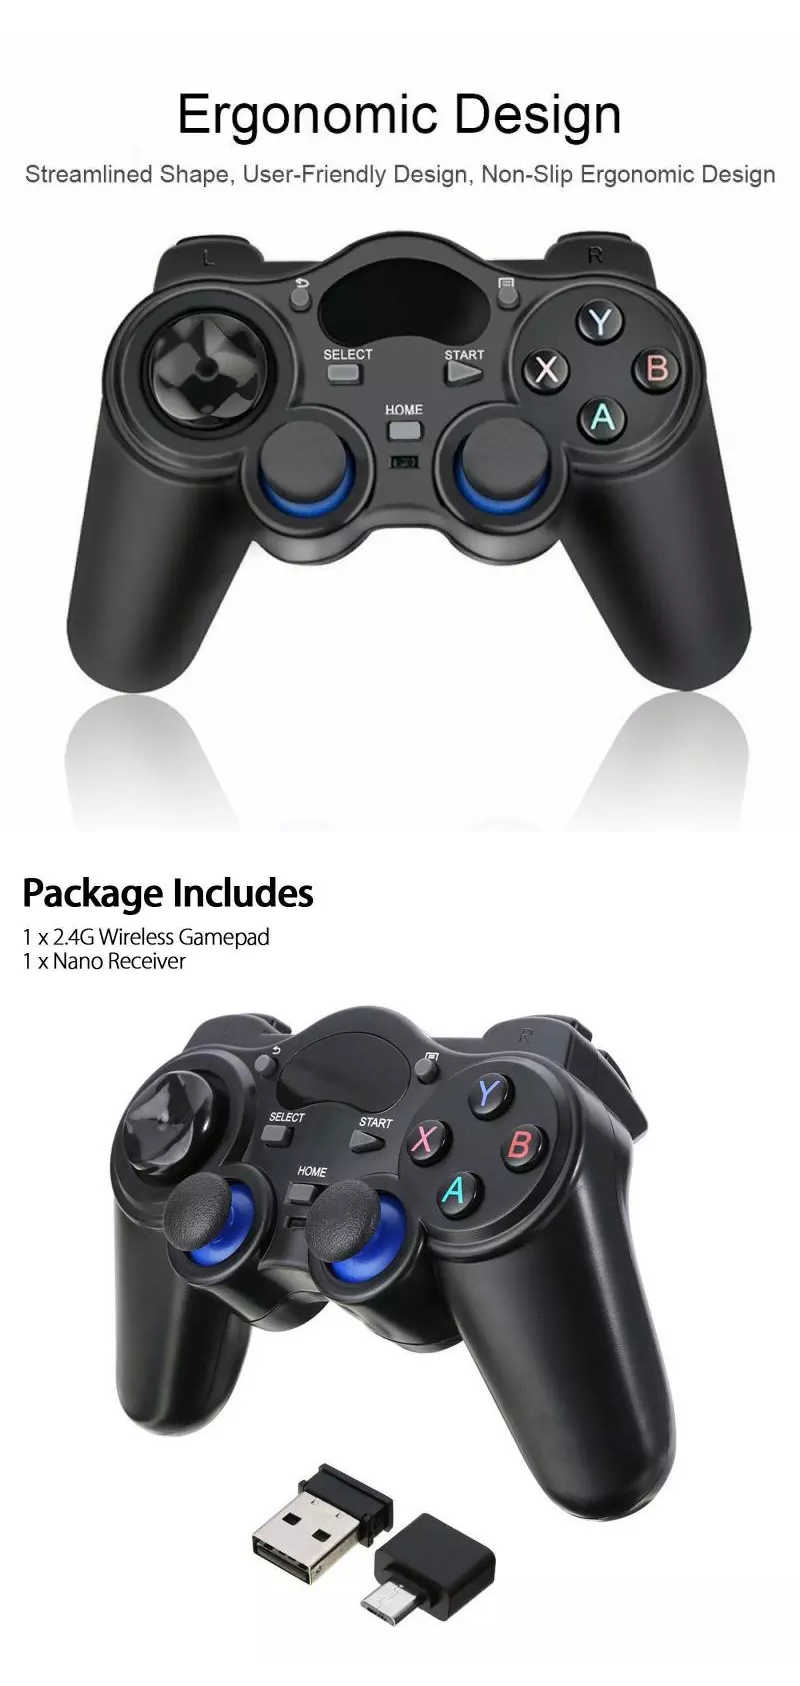 Bakeey-24G-Wireless-Game-Controller-Gamepad-Joystick-Joypad-for-PS3-for-Android-TV-Box-Tablets-1867145-4